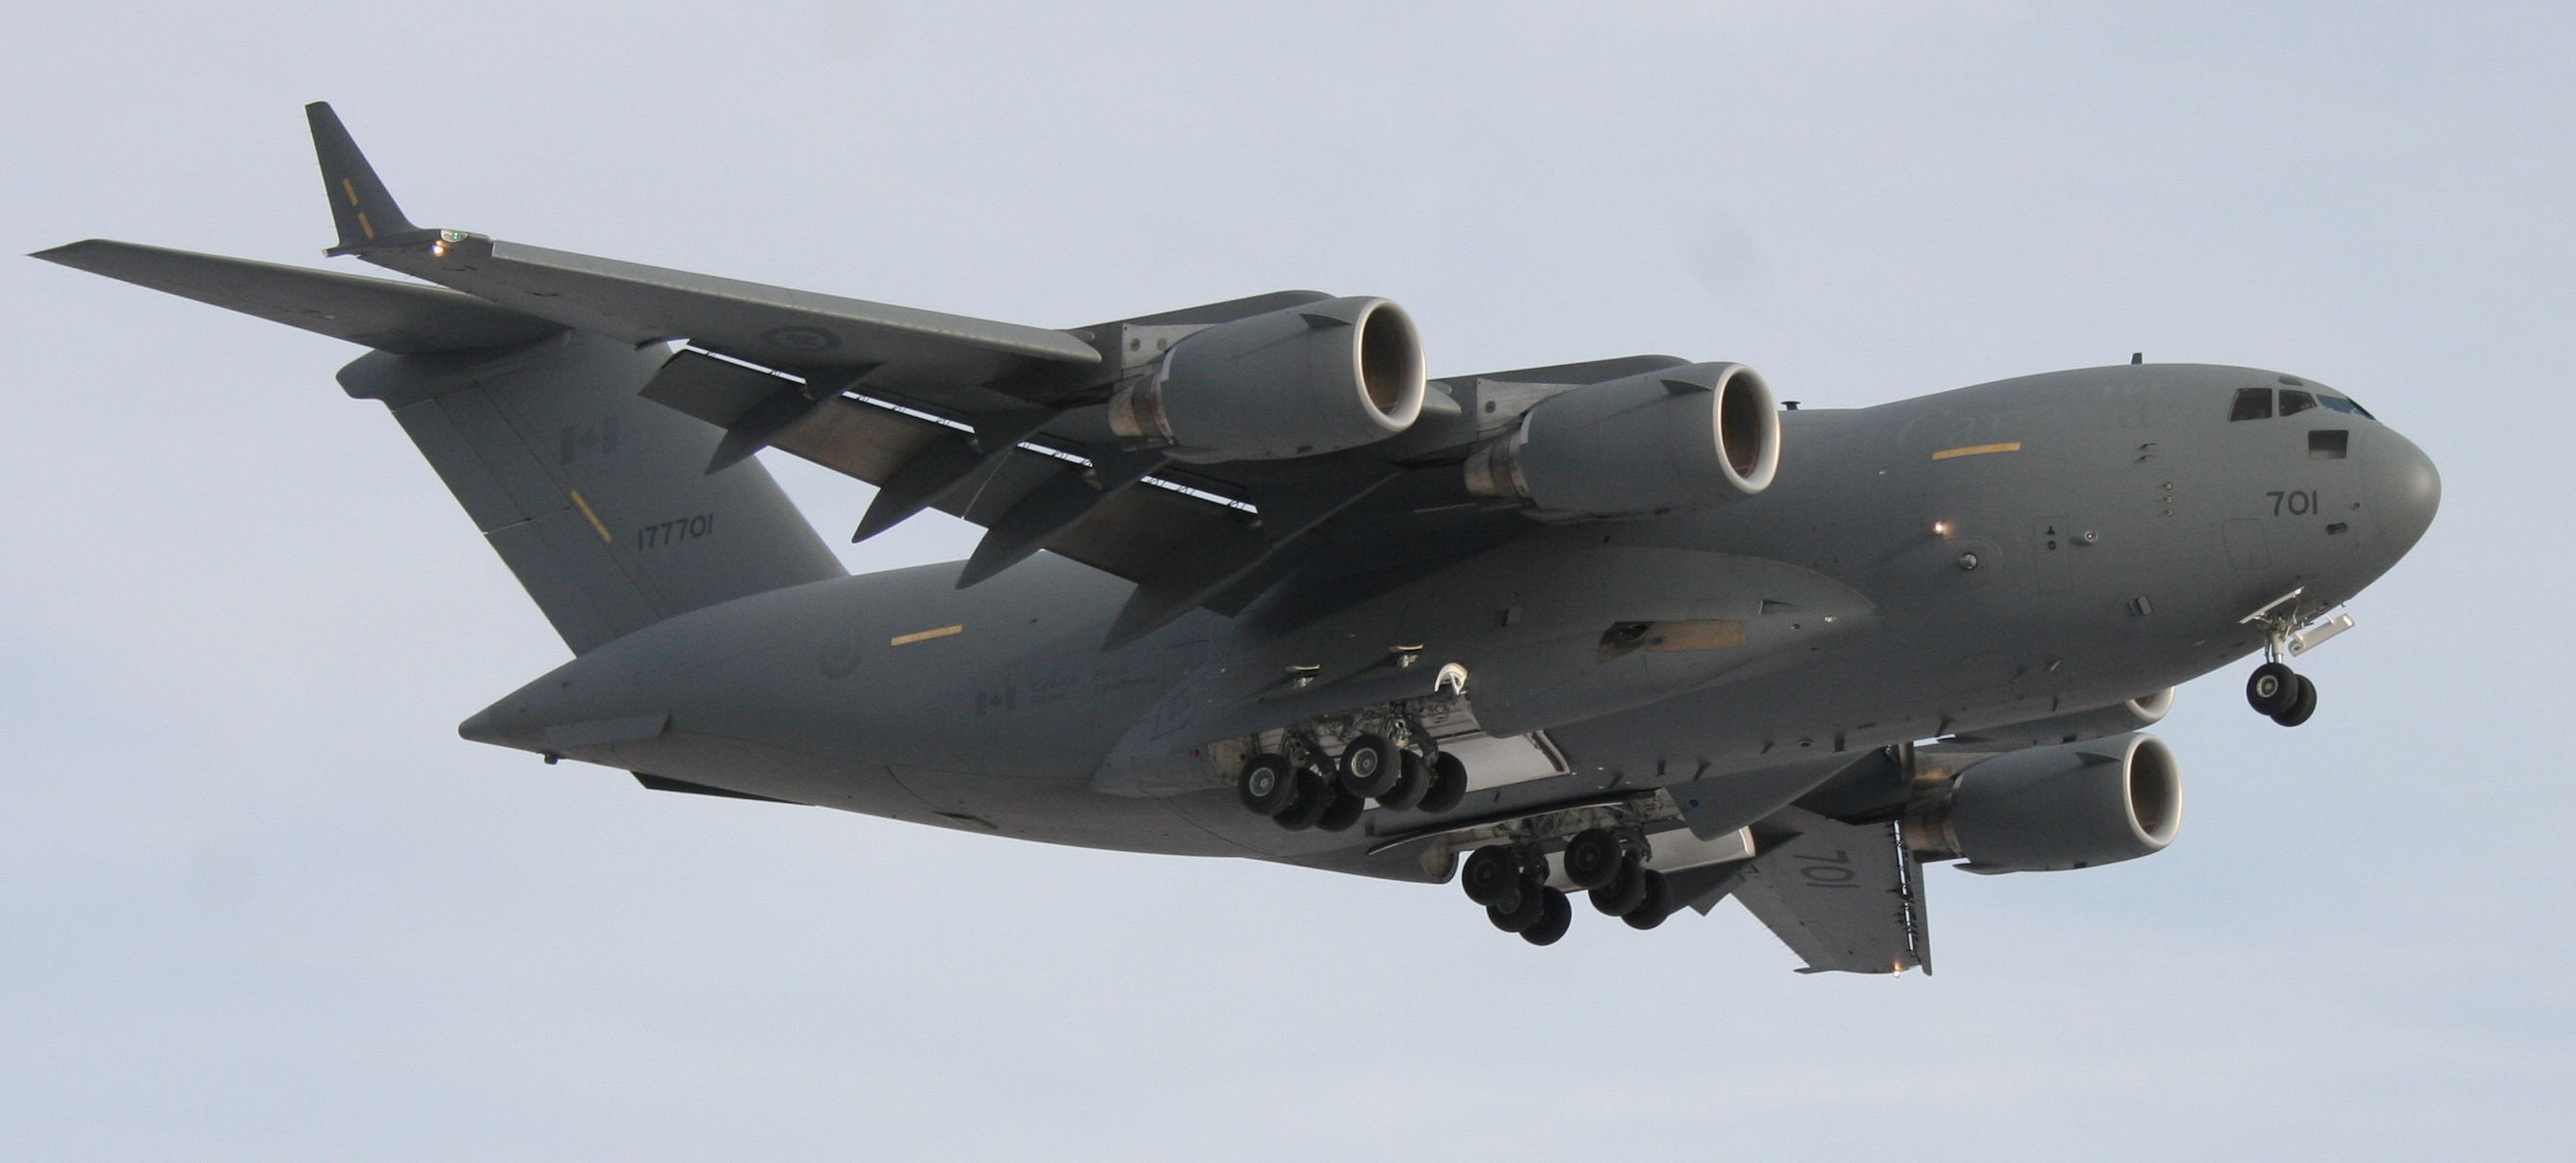         Boeing's C-10 GlobeMaster 111
IAF plans to induct 10 large, C-17 Globemaster III aircraft. Boeing has almost finalized a deal to supply 10 of these C-17 for the IAF strategic lift capability, with an option to buy another 10 in future!